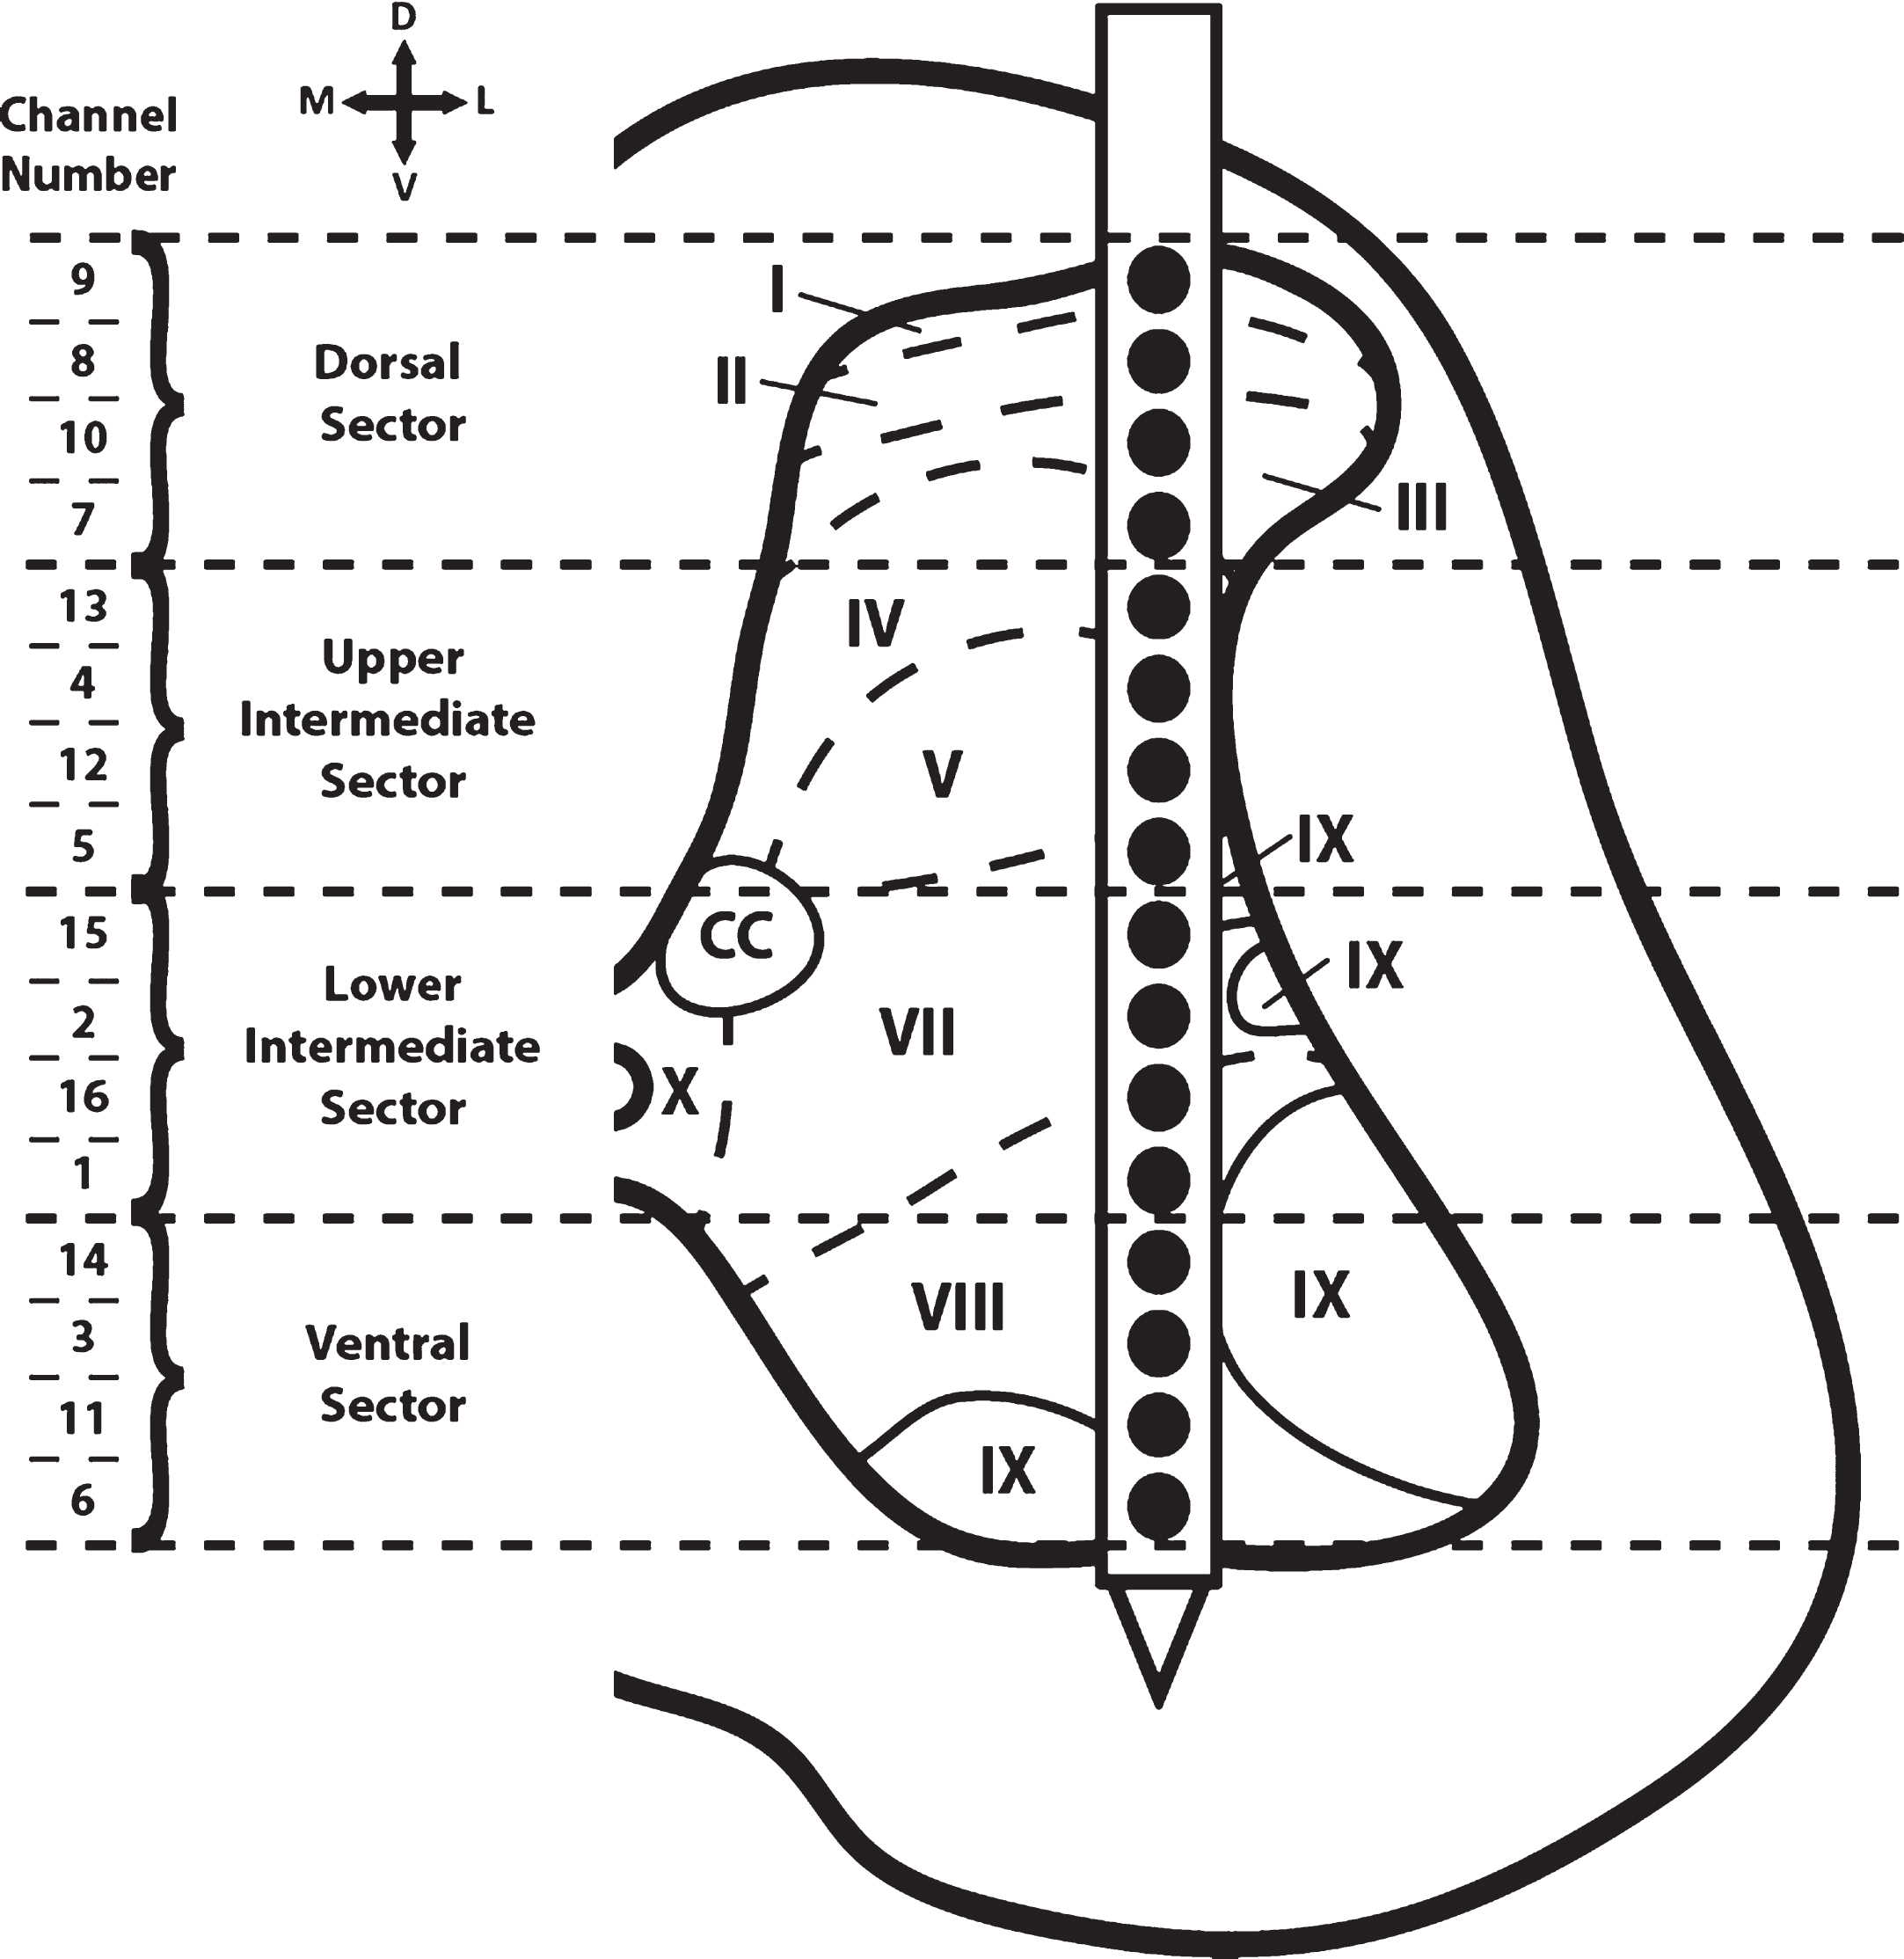 Cross-sectional schematic diagram of hindlimb spinal cord with placement of the recording electrode during the baseline and test bouts. The channel numbers of the recording sites in each of the four dorso-ventral sectors are shown at the left. Previous topographical studies indicate the rostral sector of vertebrae T13 of the Sprague Dawley rat is located at spinal cord segmental level L2-L3 (Gilerovich et al., 2008). Thus, the recording electrode was located in segmental level L2-L3. Based on cytoarchitectonic organization in the rat, electrode sites were in or near all laminae except for laminae VI (seen only in L3-S1 segments of the rat) and laminae X (found medially around the central canal; CC) (Molander, Xu, & Grant, 1984).